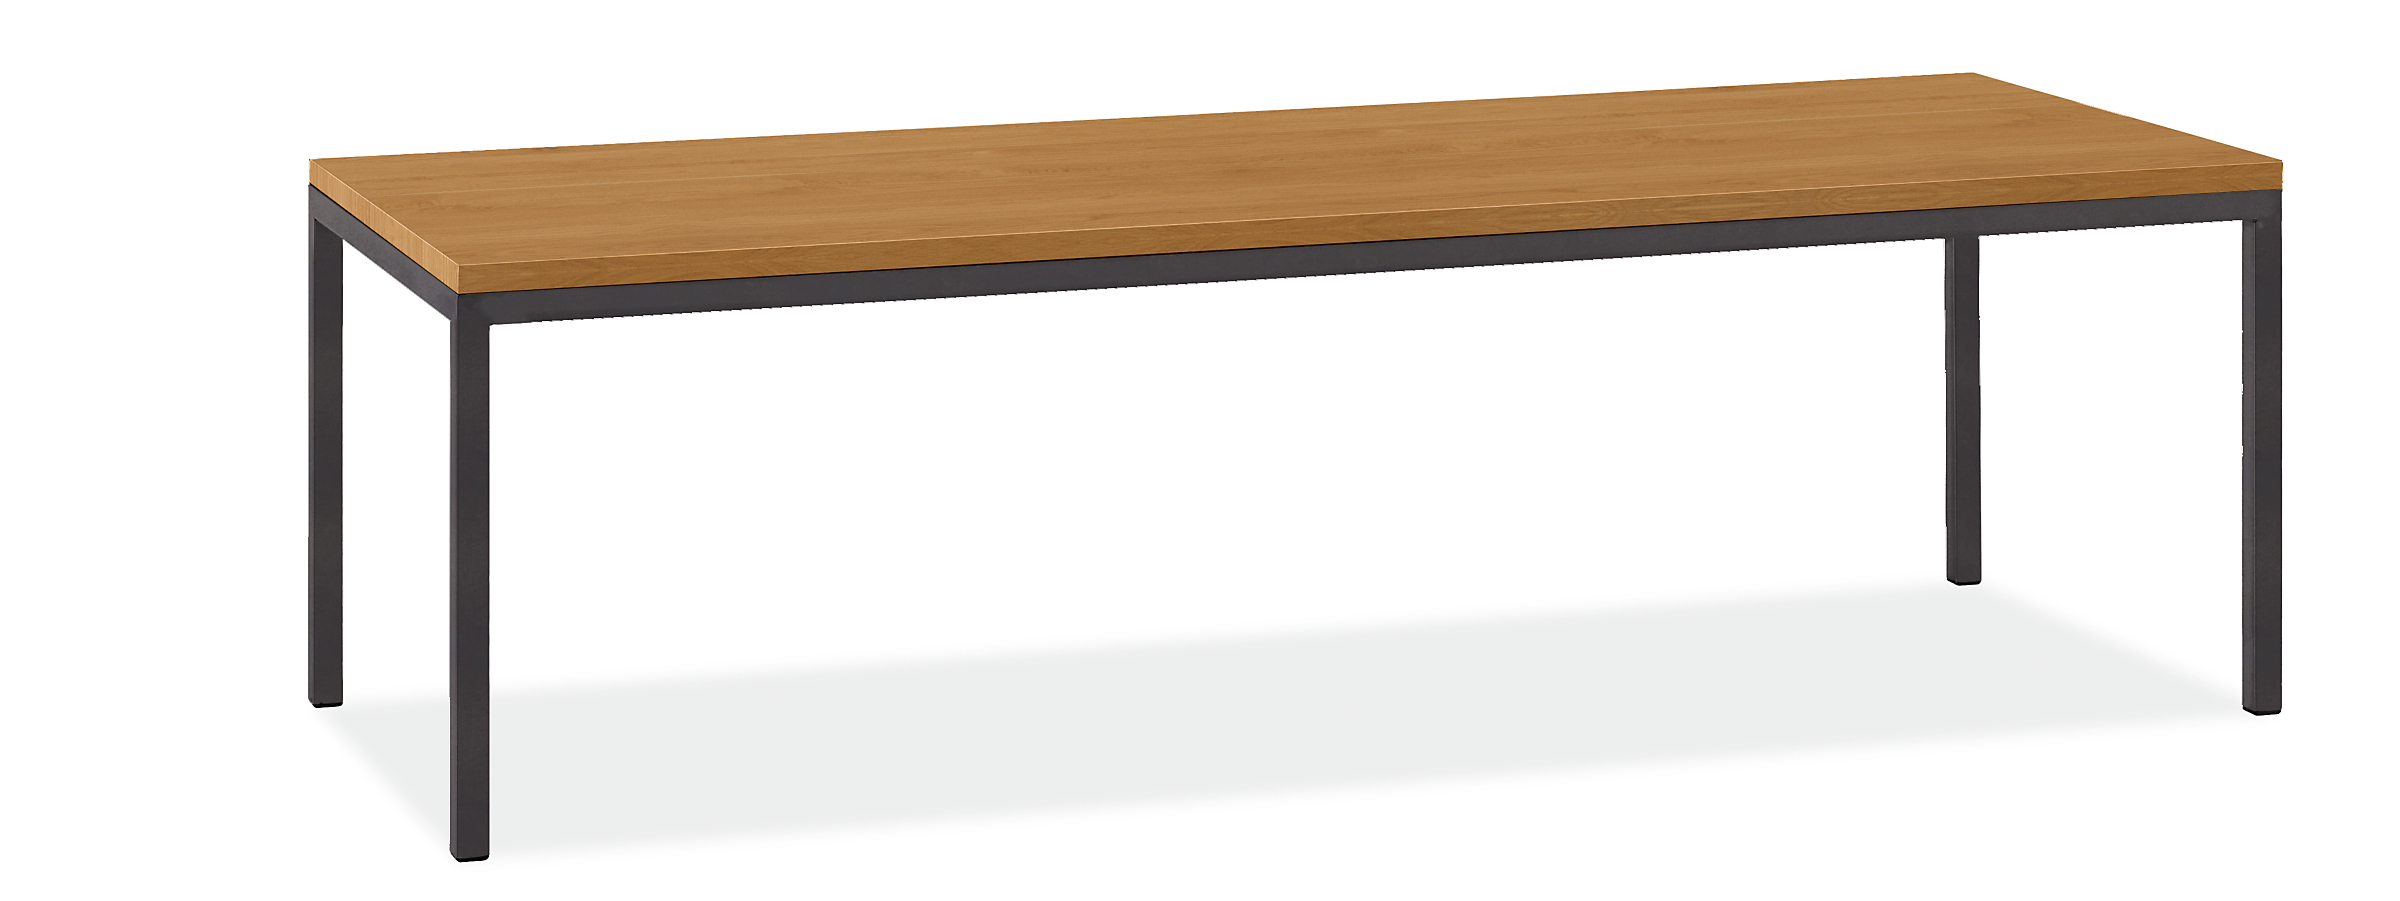 Parsons 96w 34d Table with 1.5" Leg